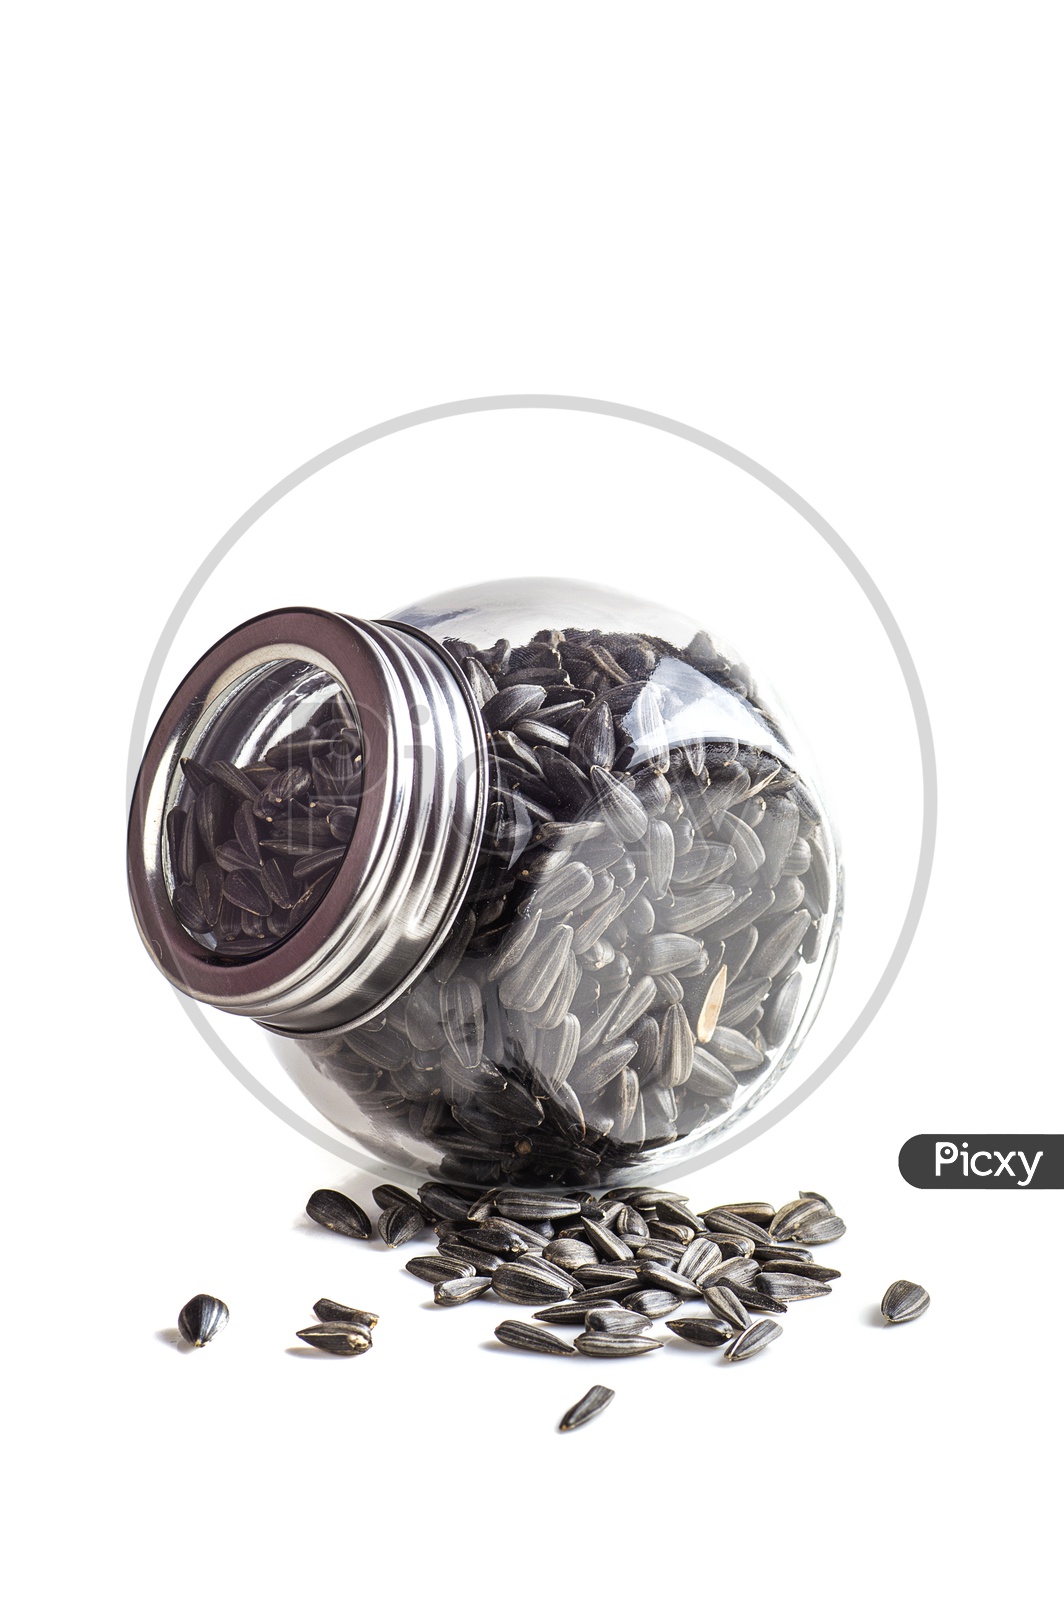 Sunflower seeds in glass jar on a isolated white background